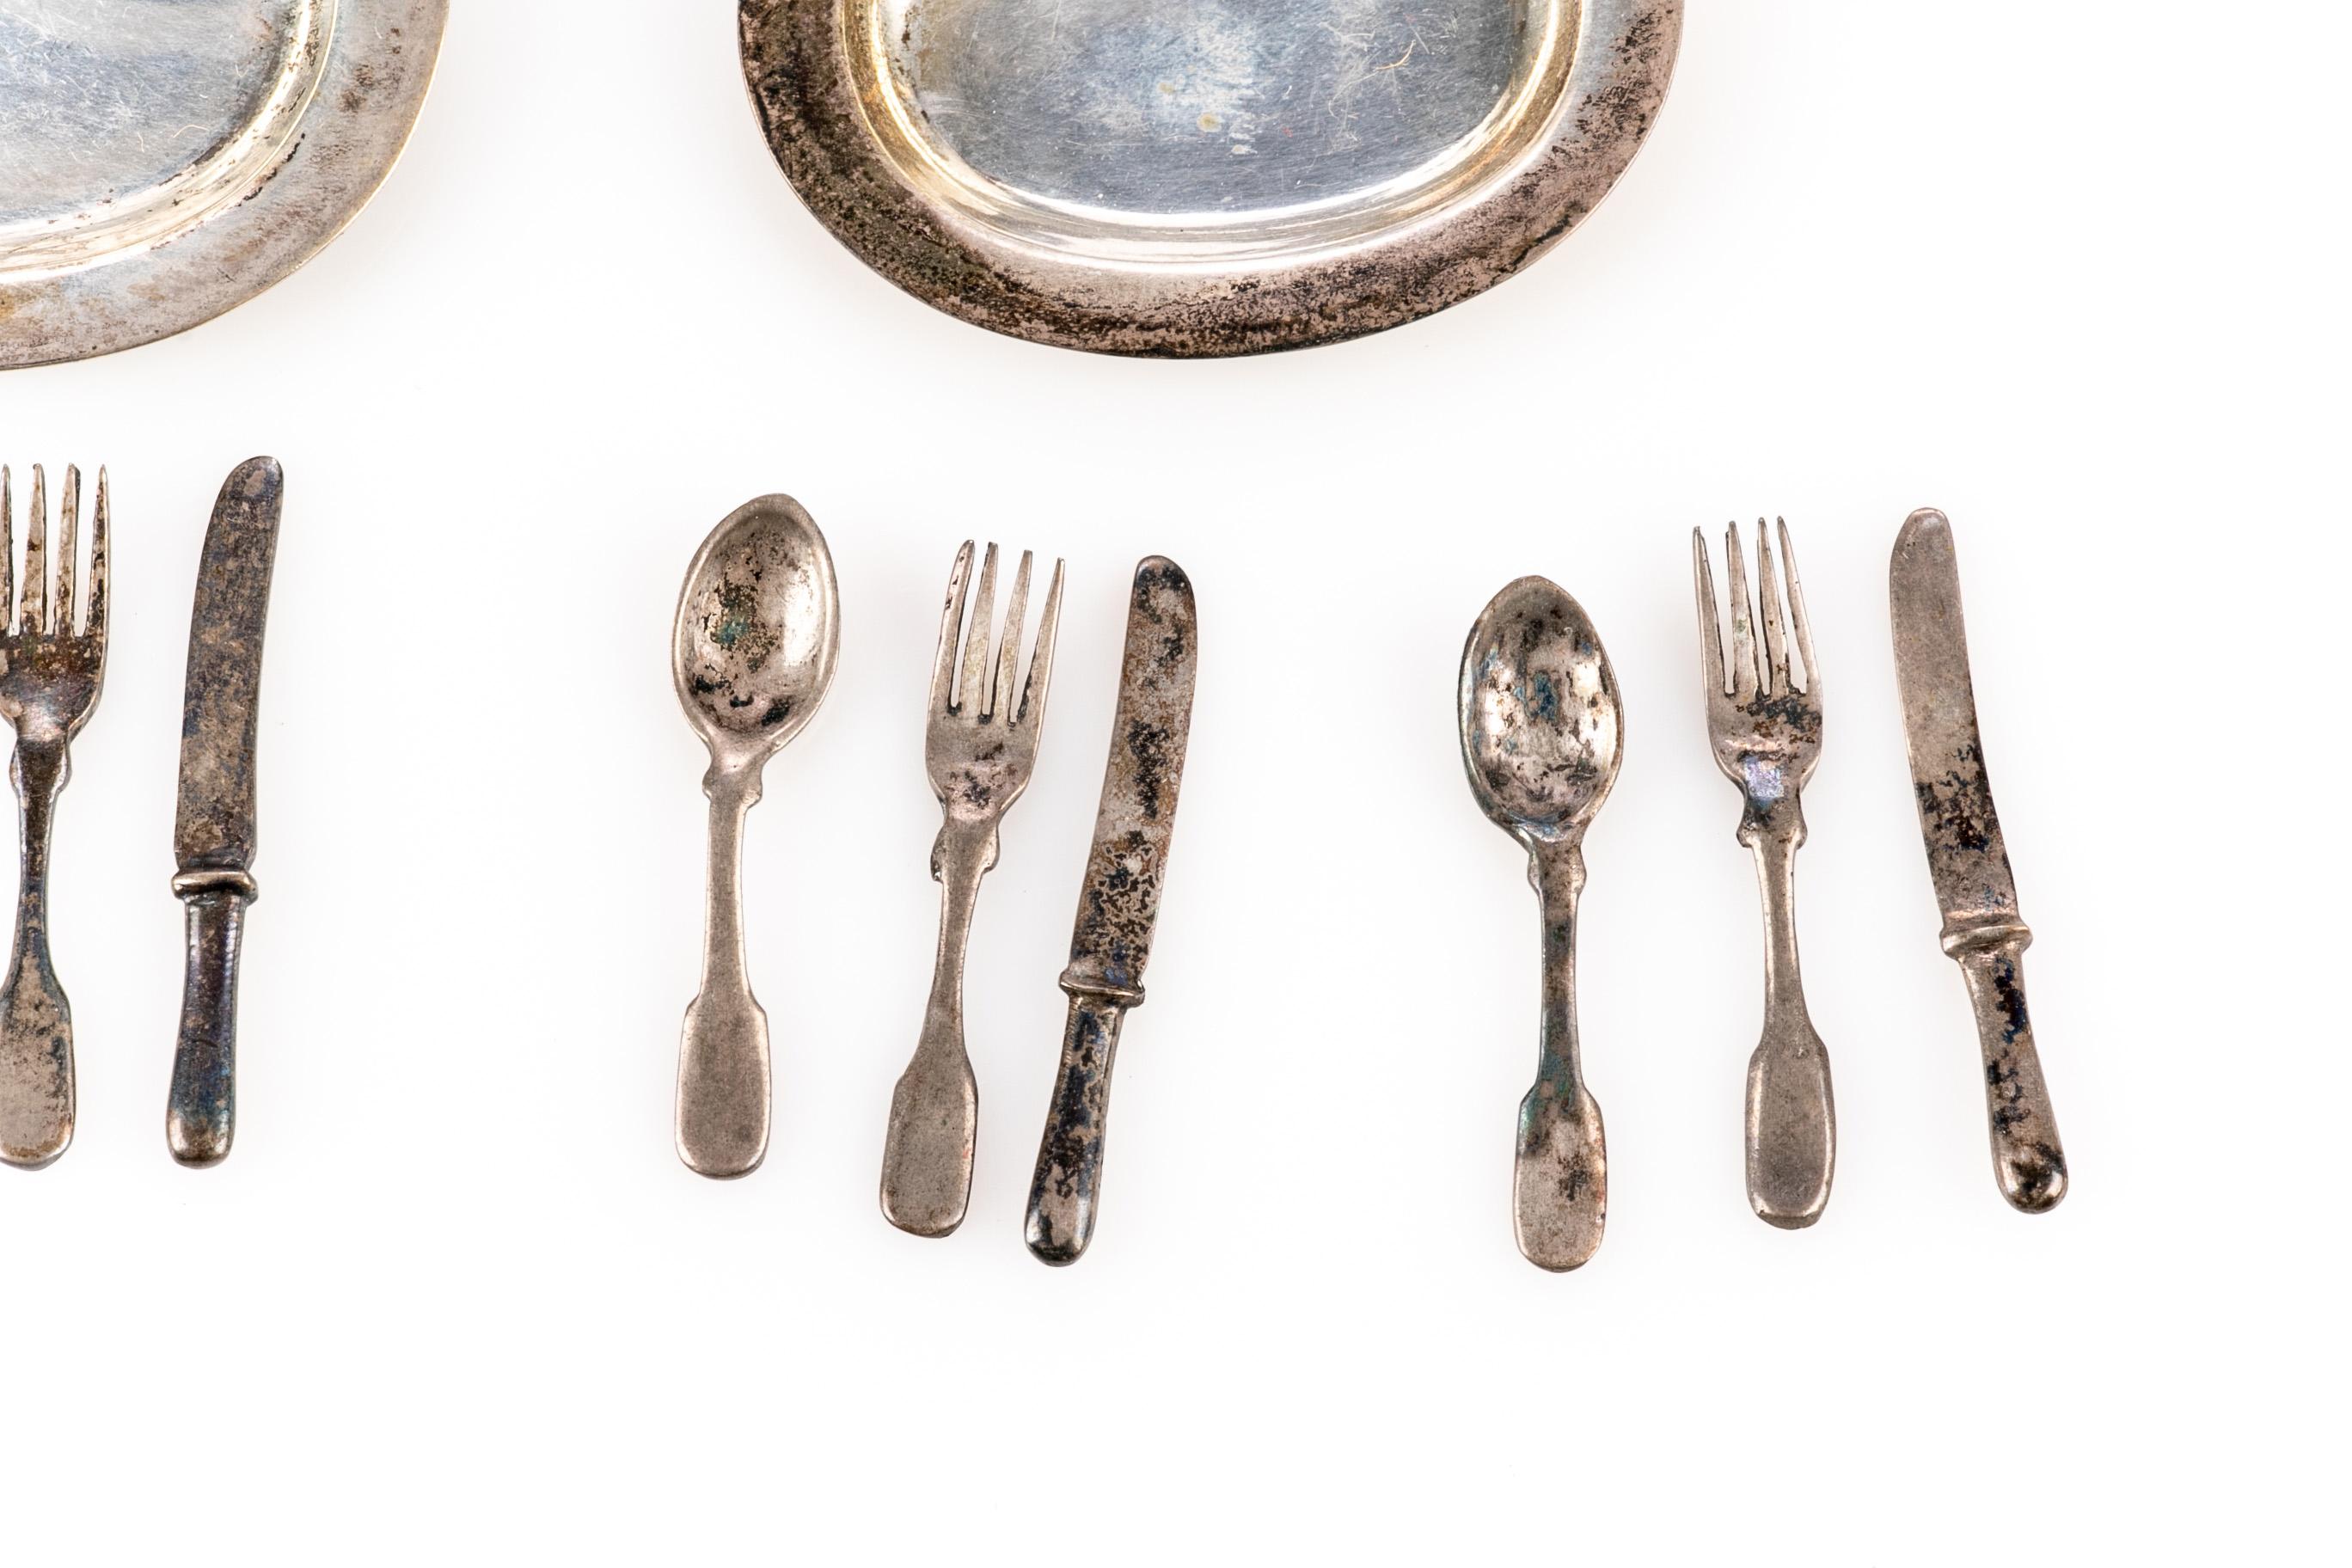 Group of thirty English sterling silver dollhouse miniature serving pieces and utensils including trays; tea and coffeepots; candelabras; a pedestal bowl, flatware and other unique pieces. Most are marked 